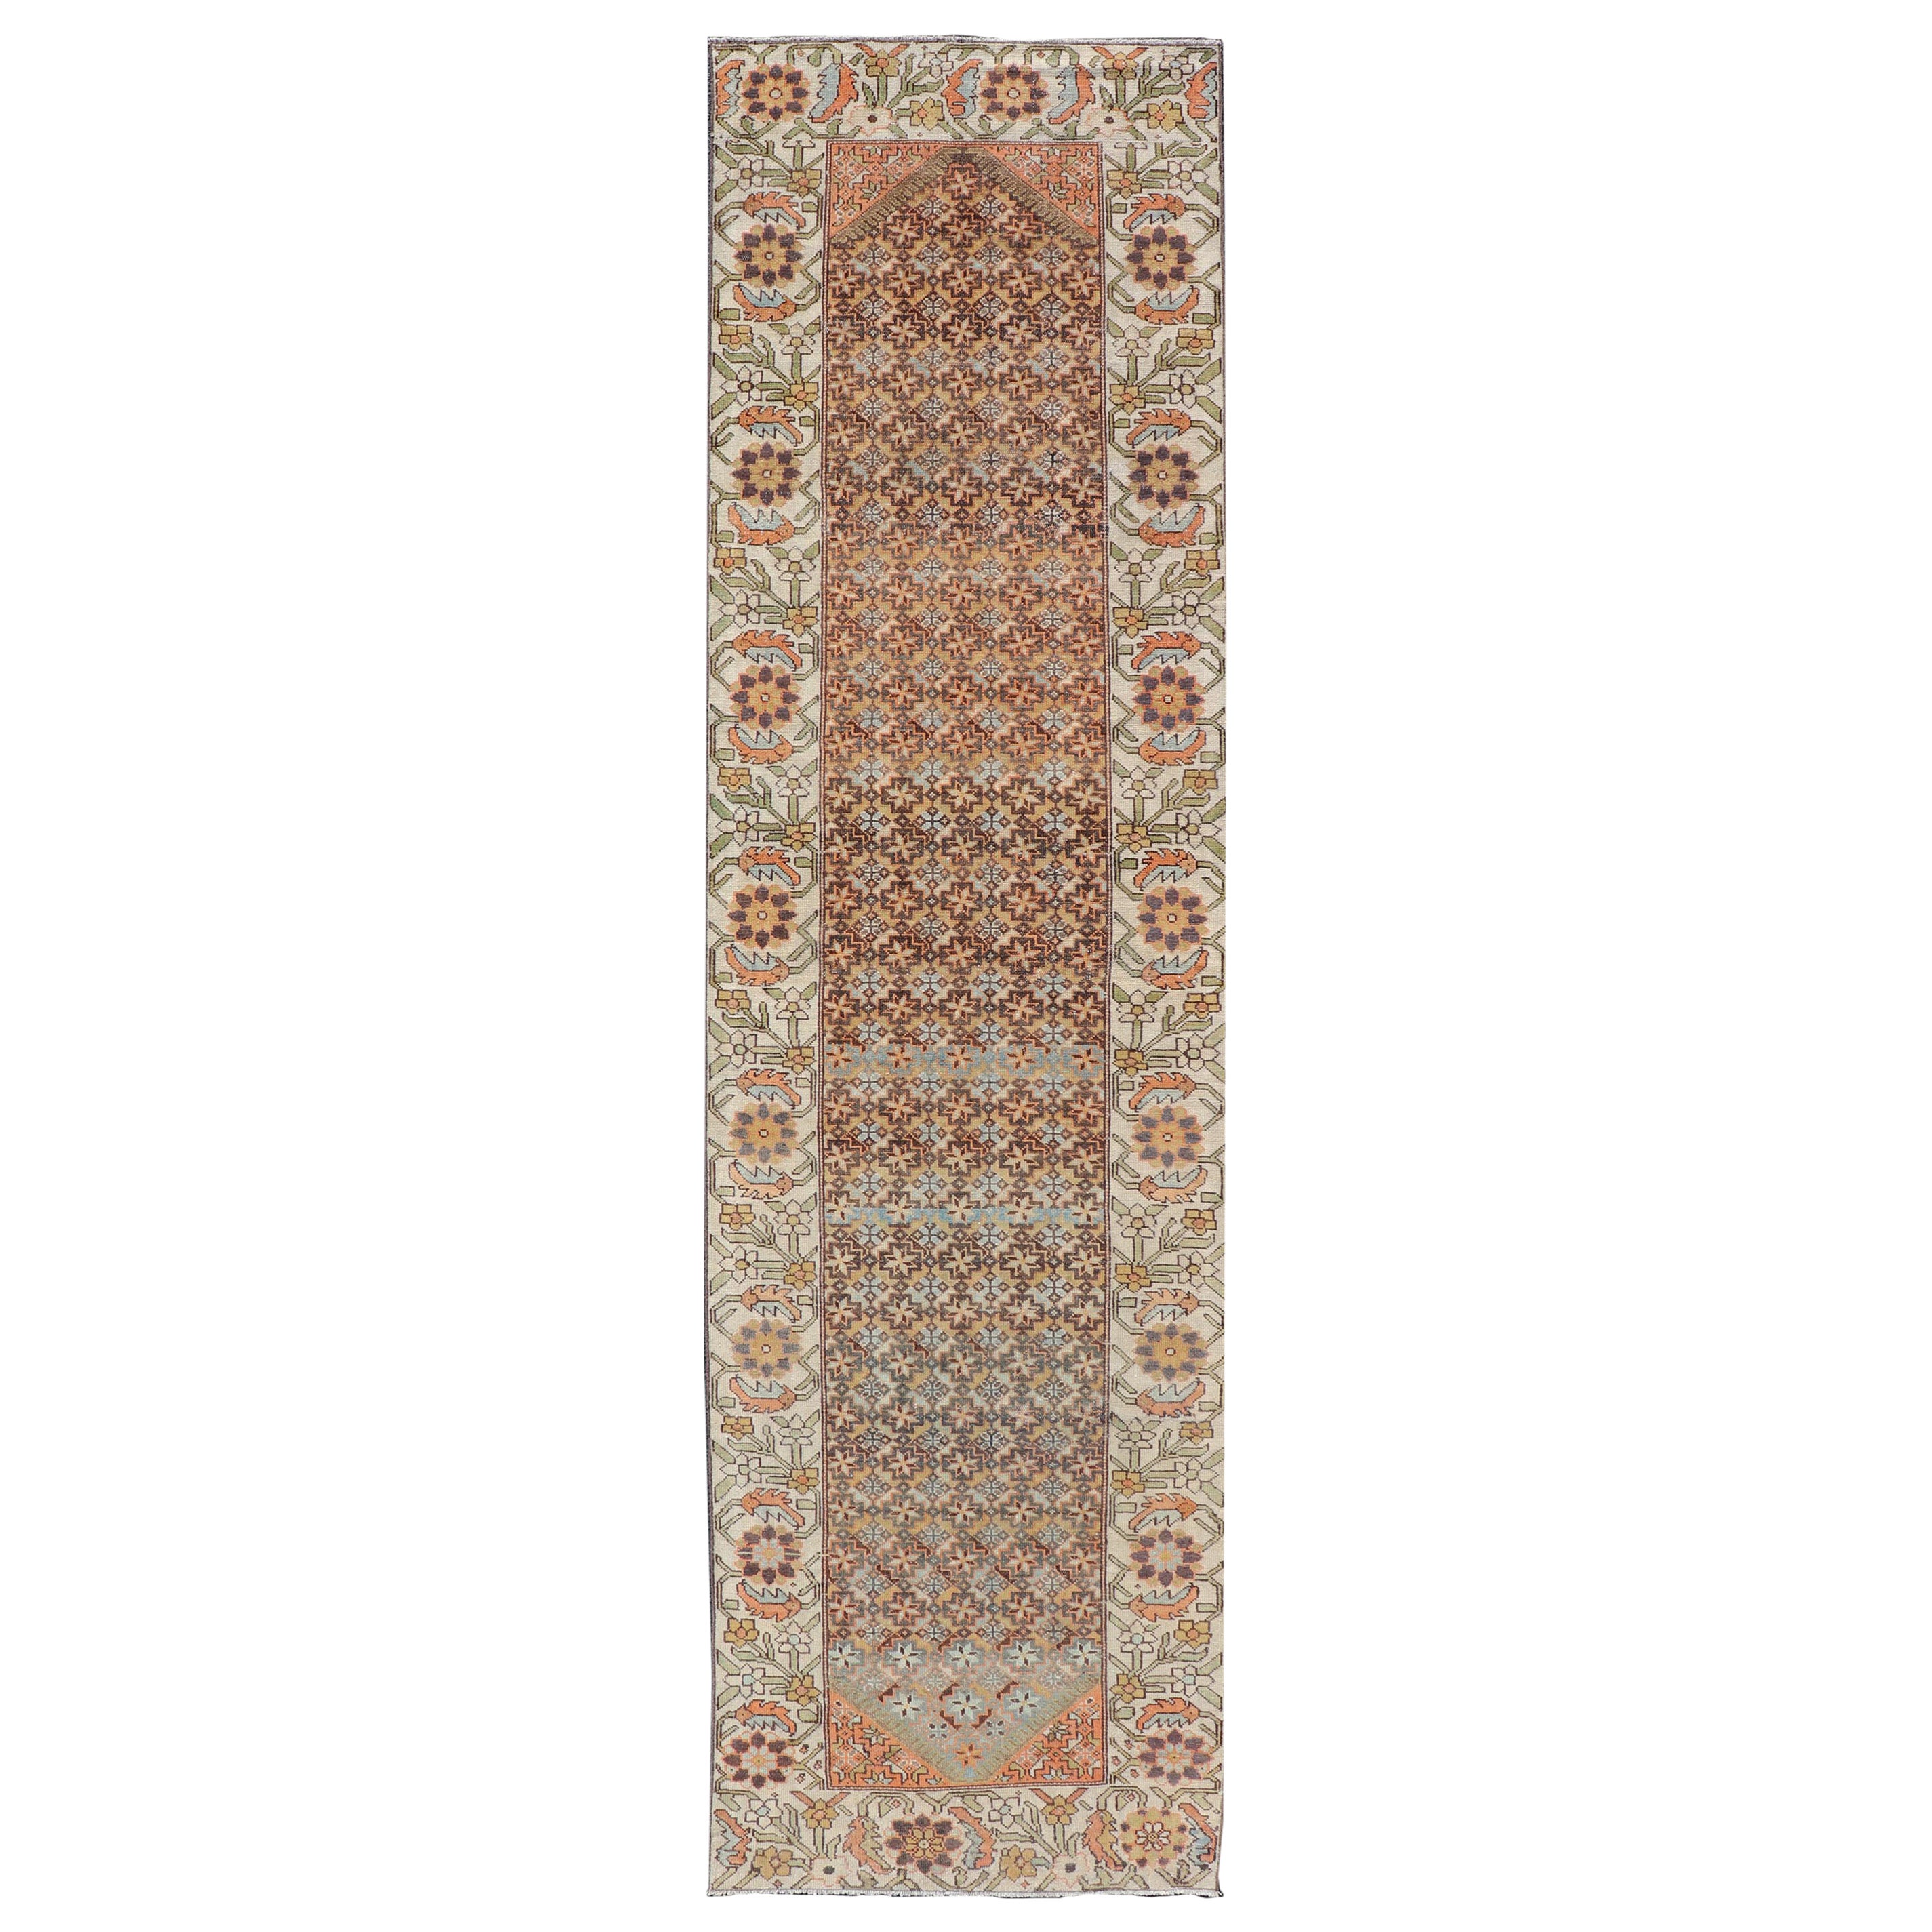 Colorful Antique Persian Bakhtiari Runner with All-Over Floral and Tribal Border